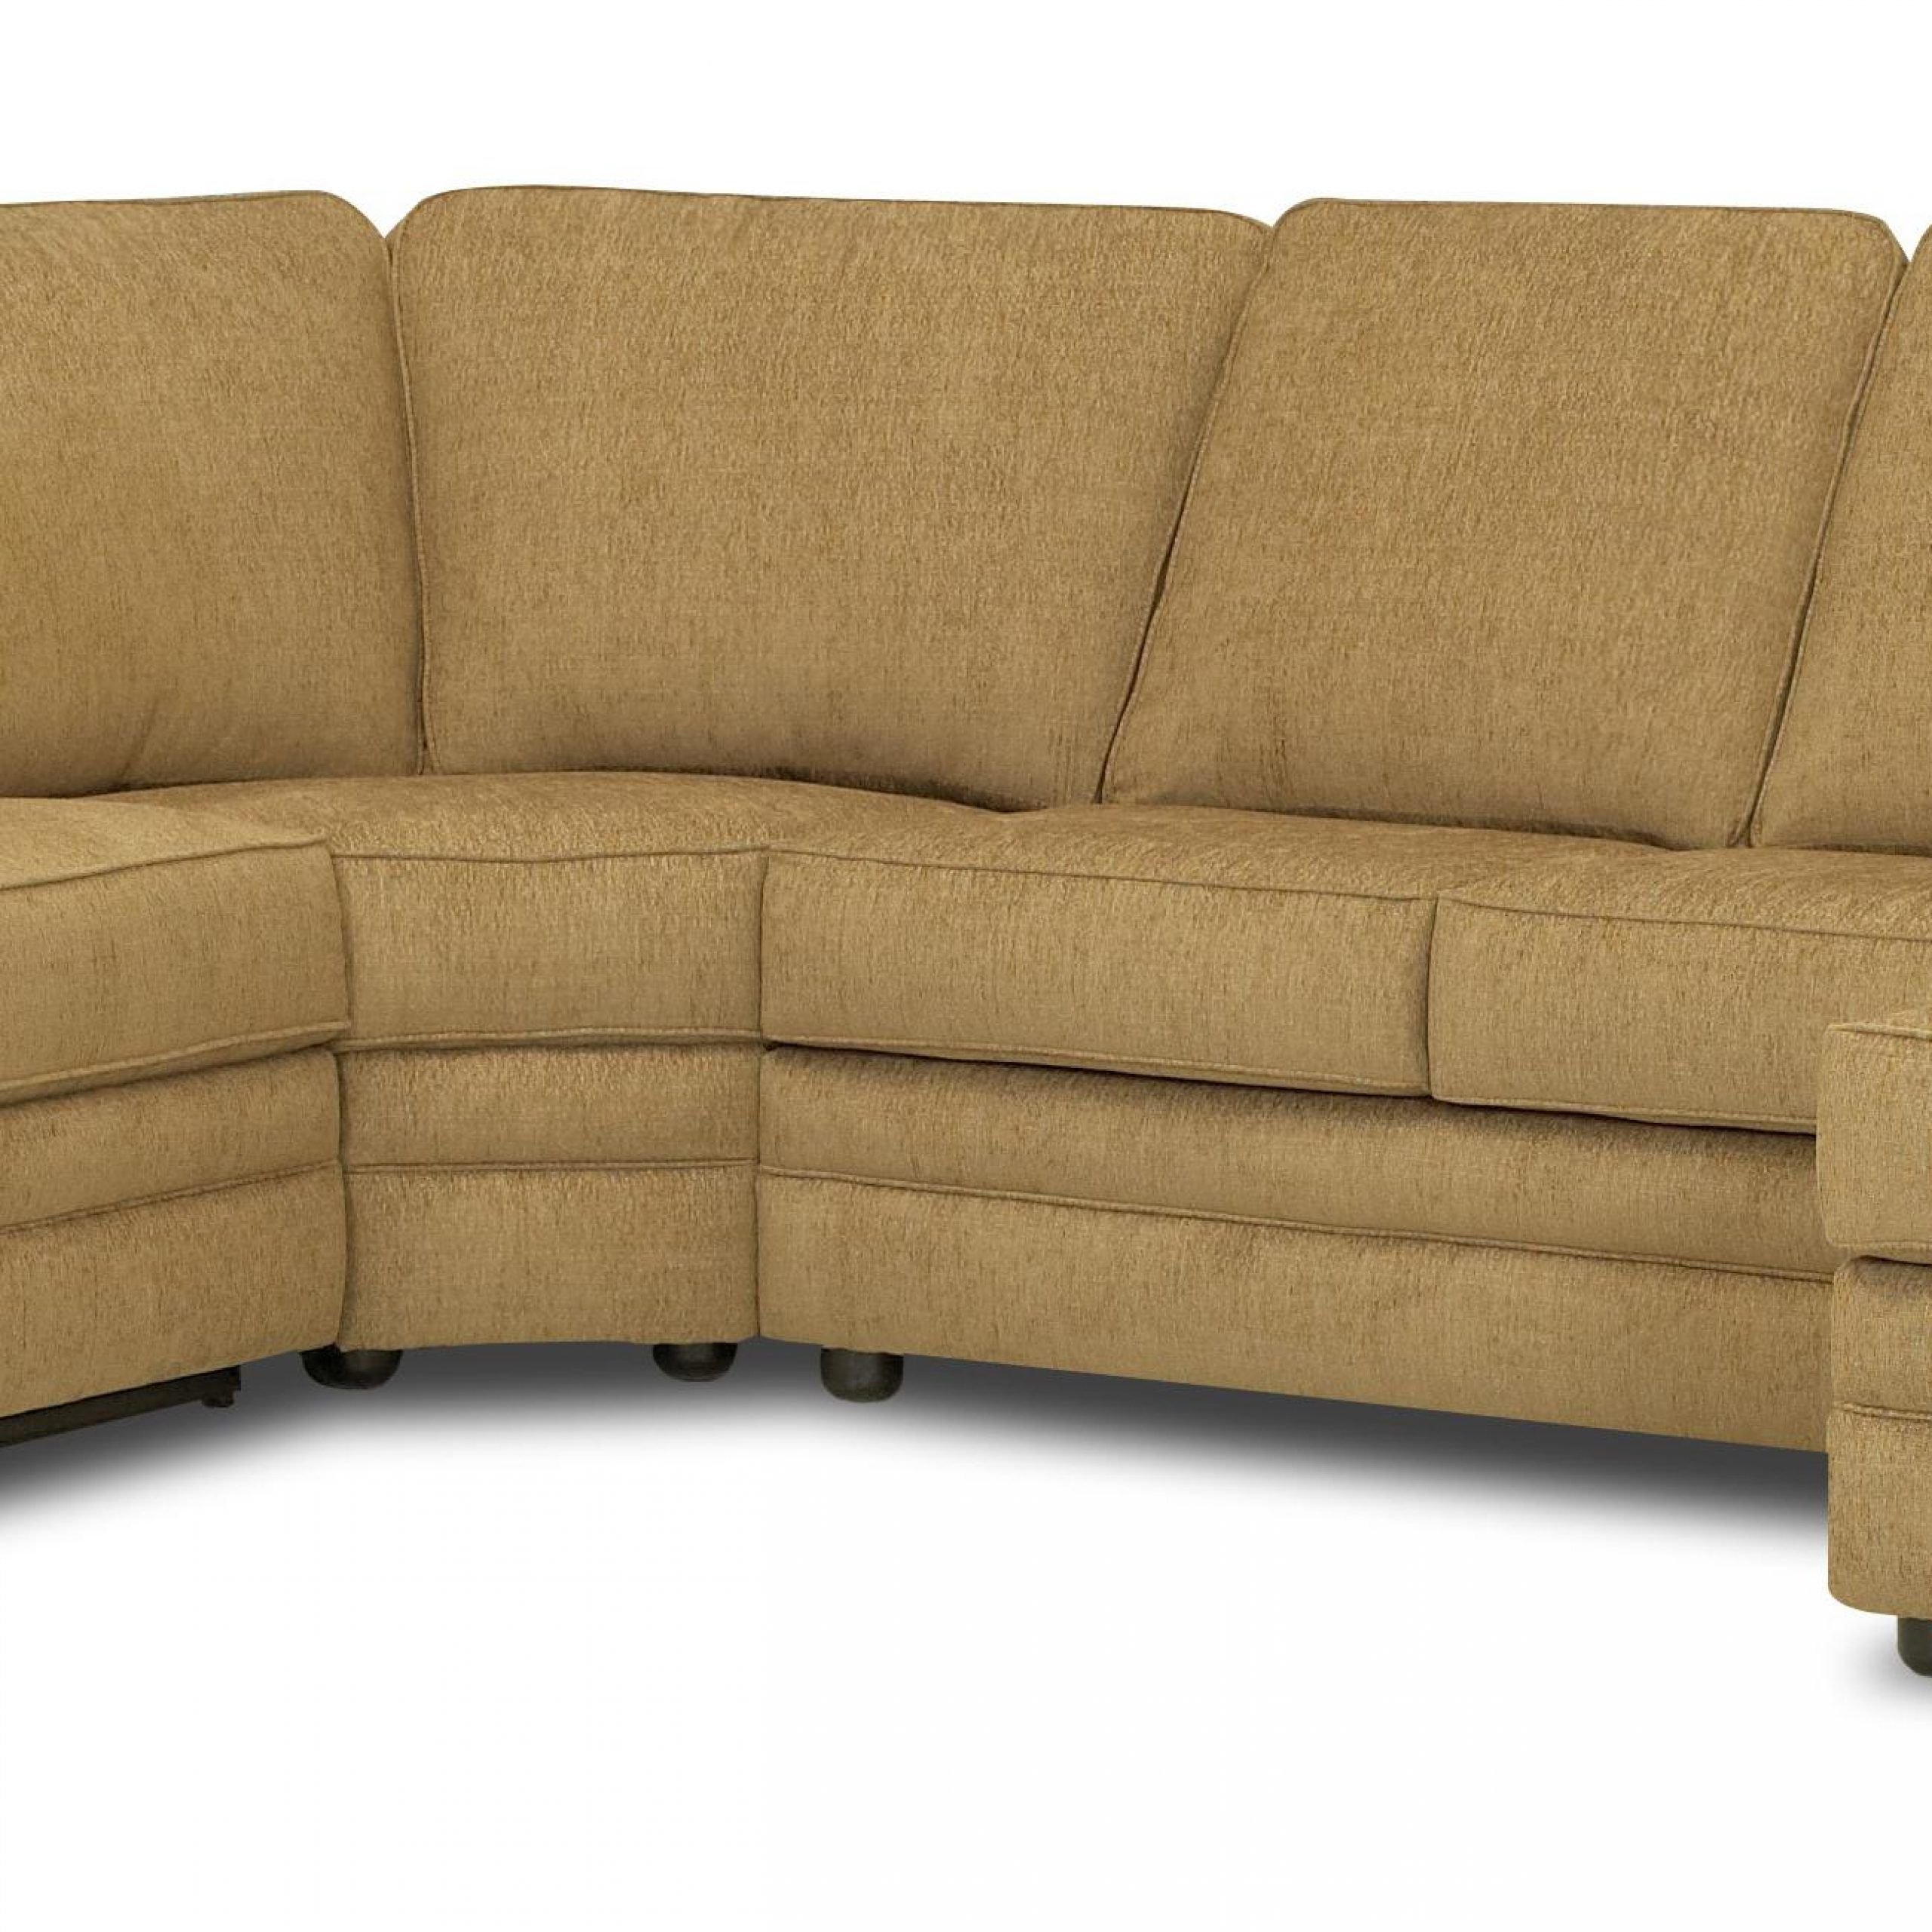 Palisades Reclining Sectional Sofas With Left Storage Chaise Within Most Current Reclining Sectional With Left Side Chaiseklaussner (View 24 of 25)